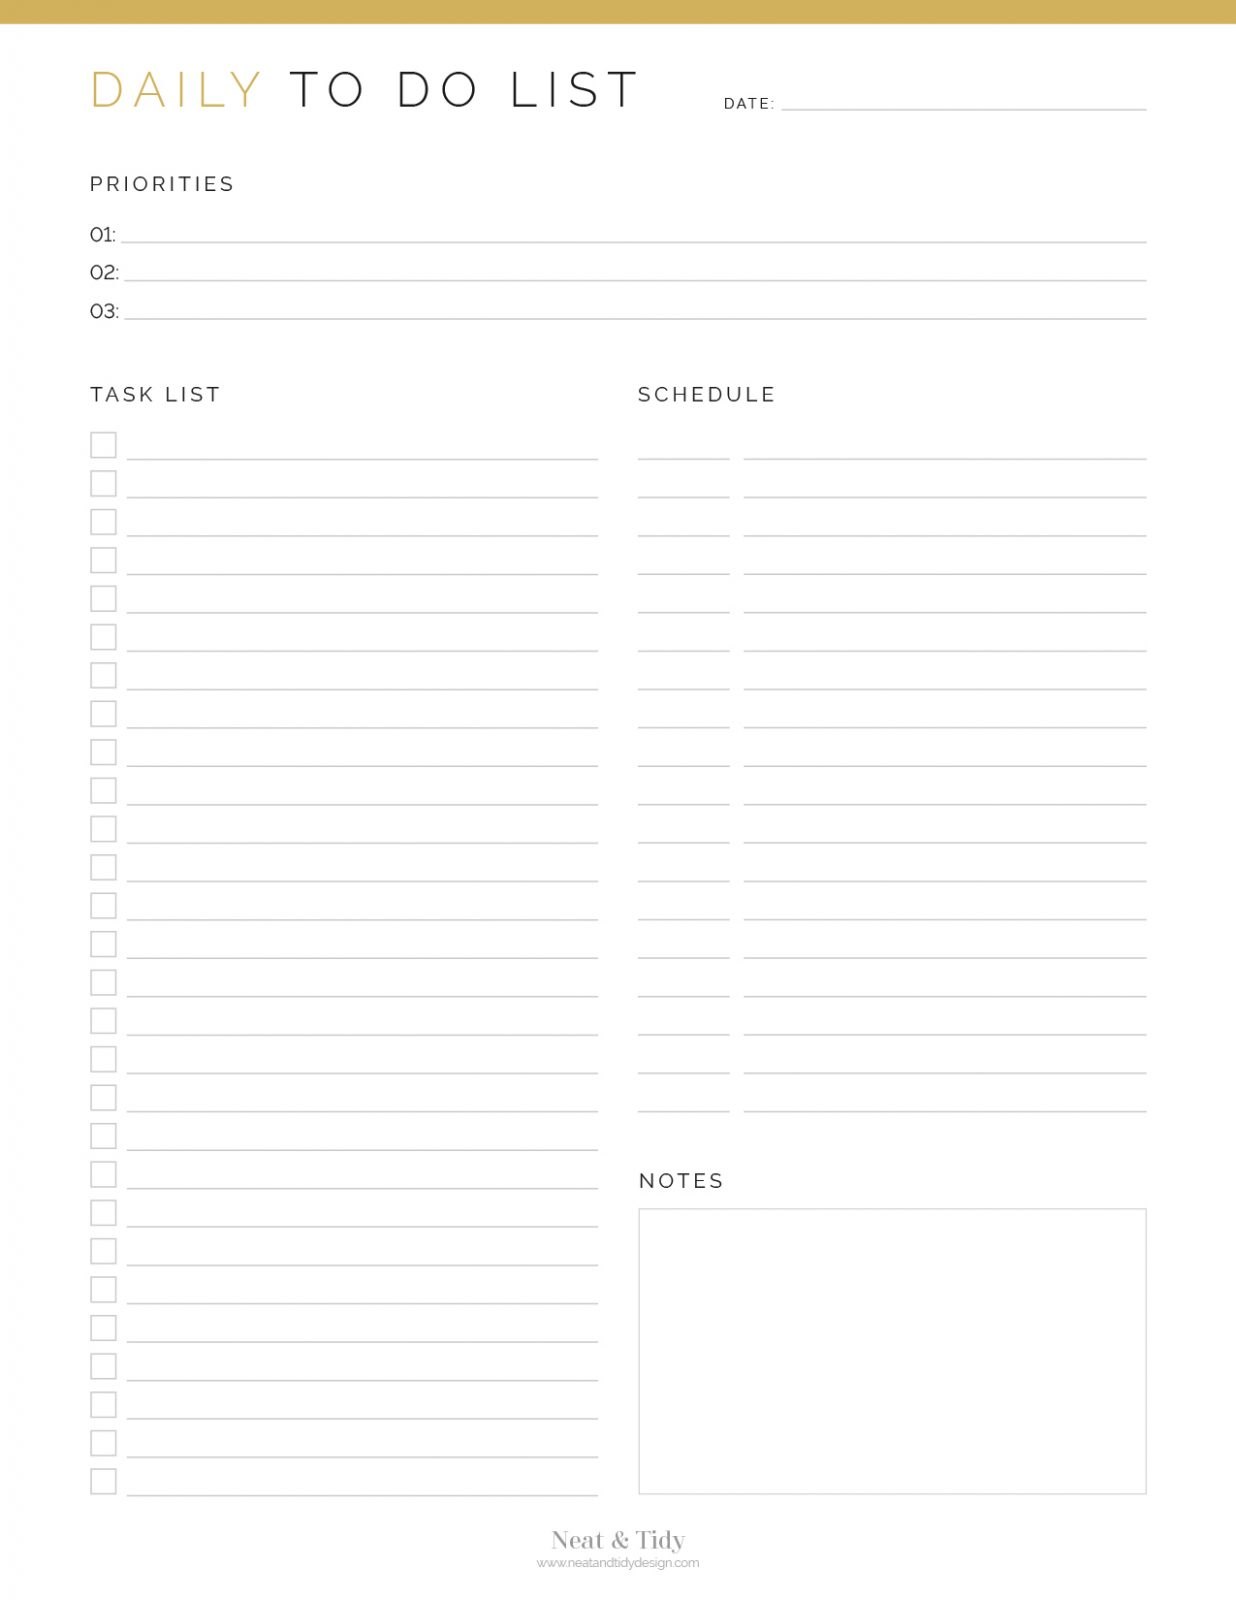 Daily To Do List v2 - Neat and Tidy Design